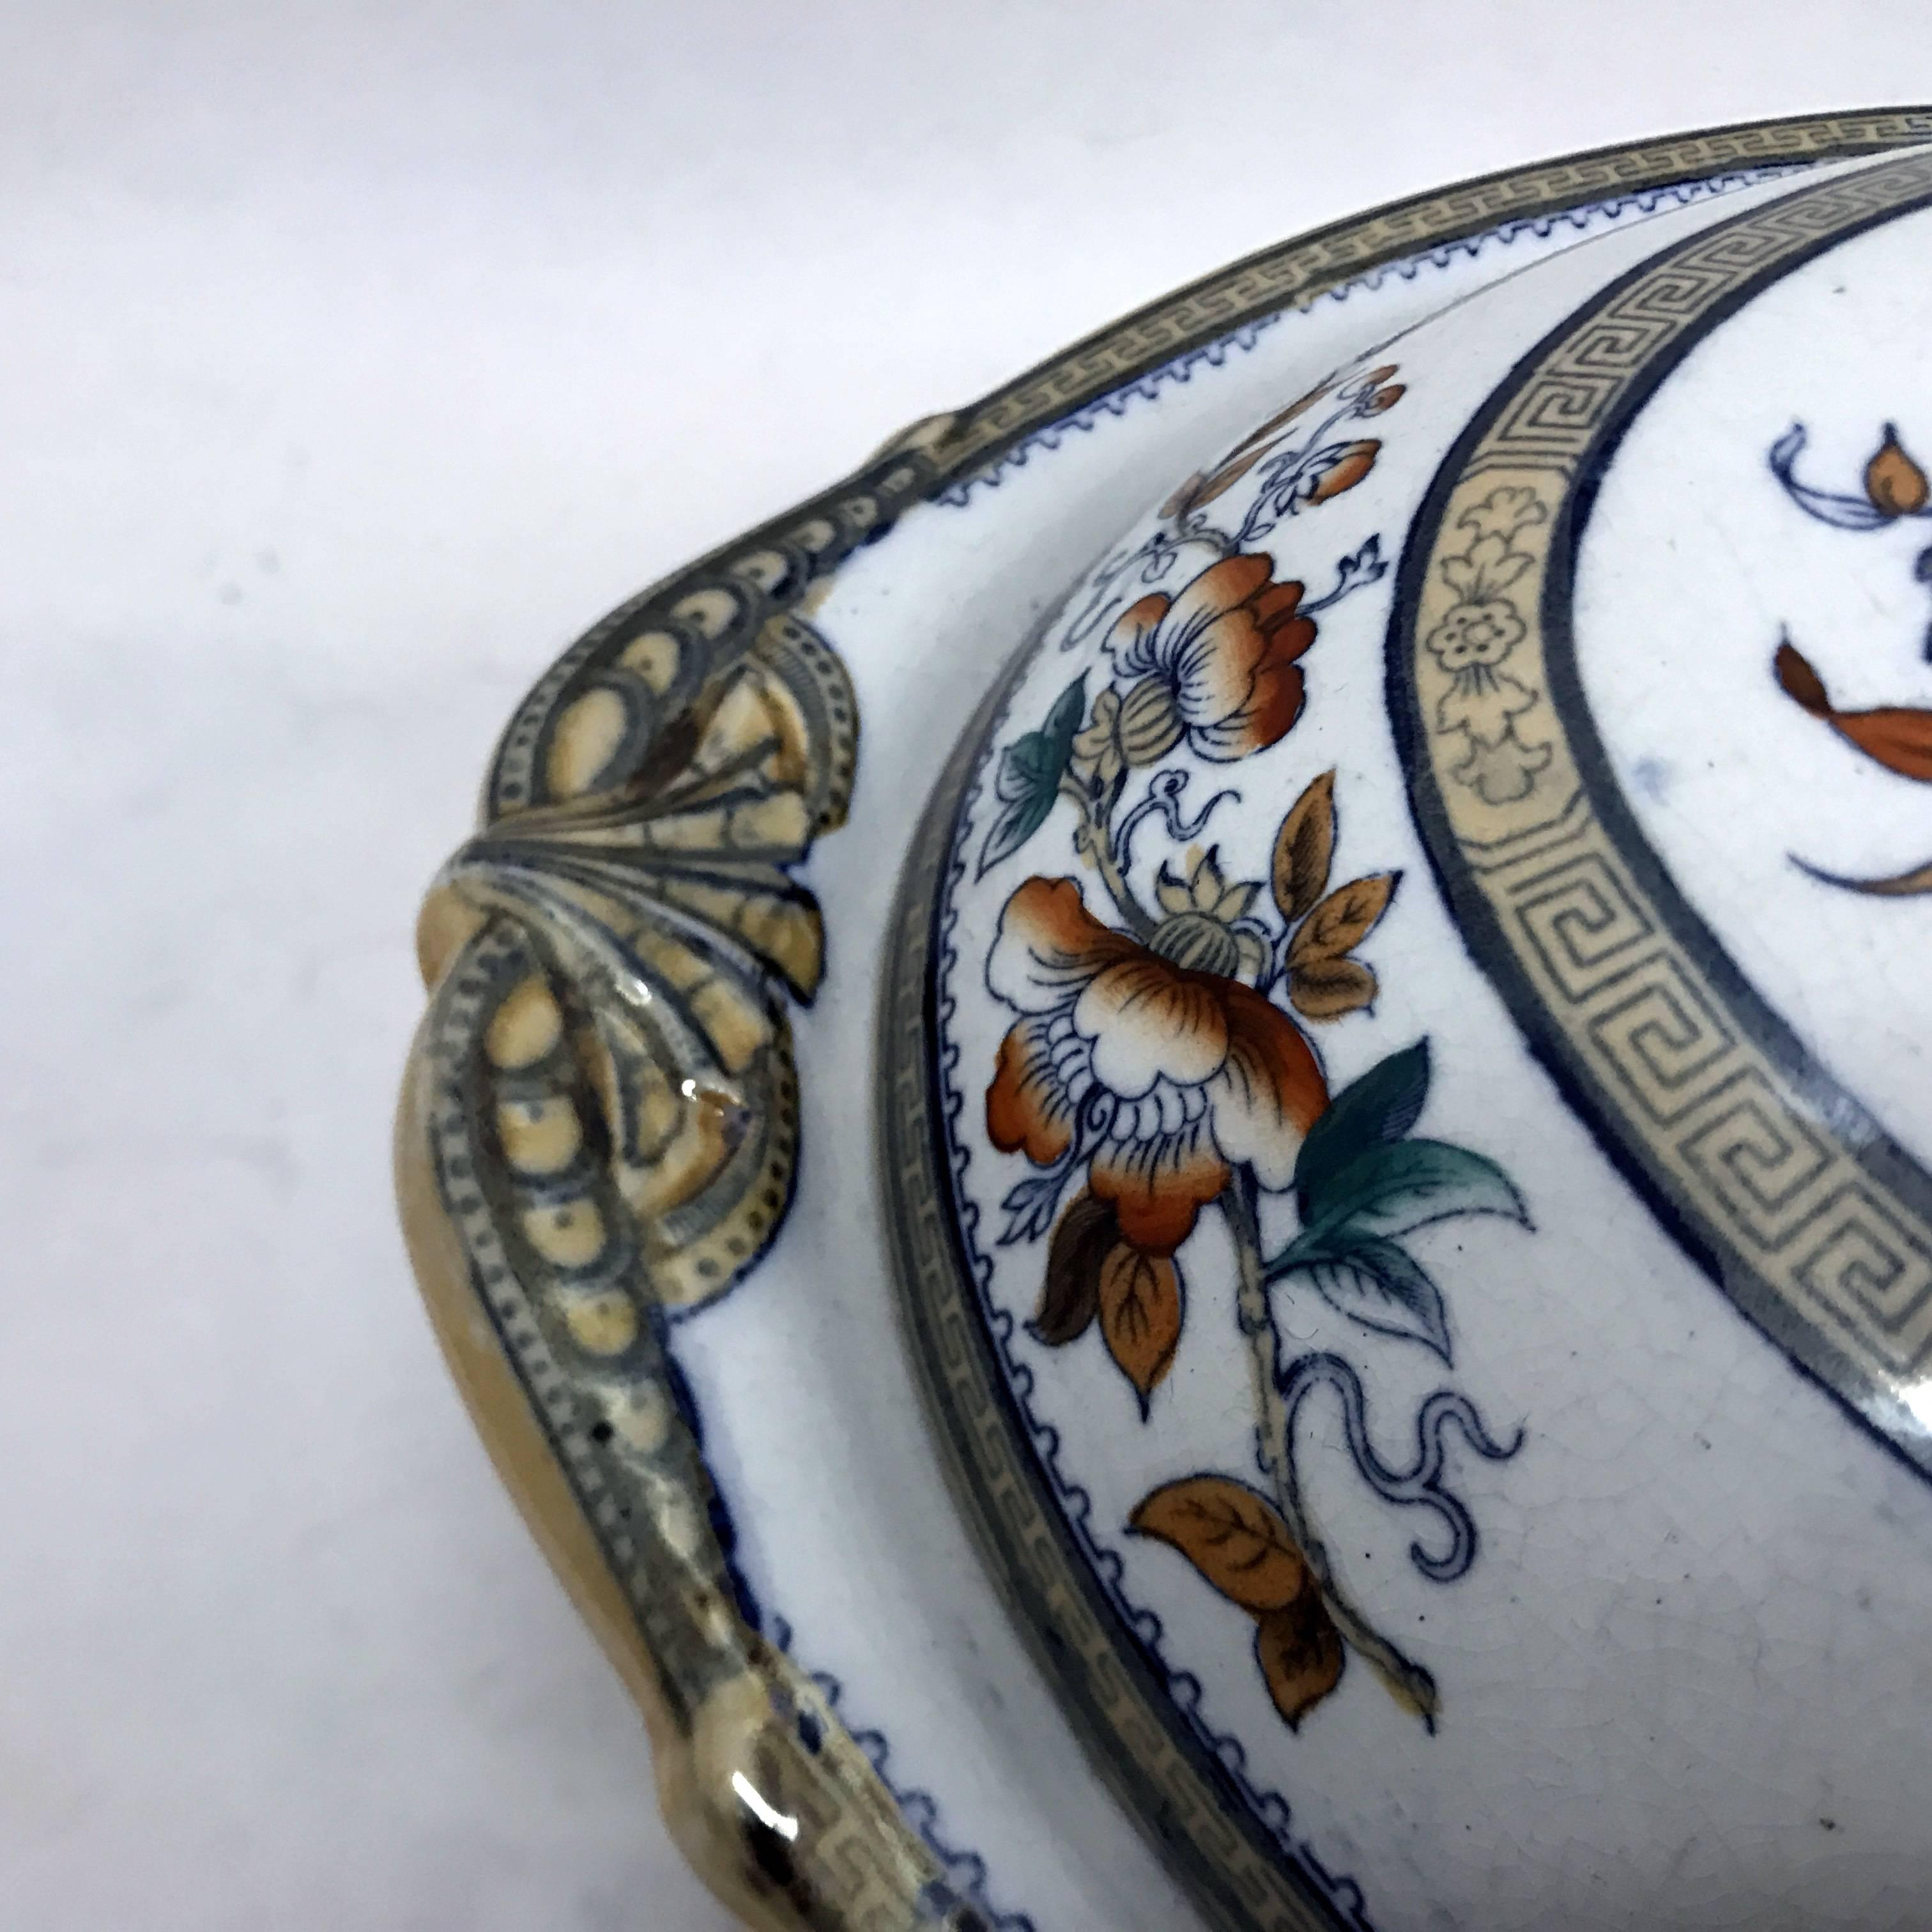 Particular ceramic soup tureen decorated with oriental flowers and shells, good conditions overall, made in England in Victorian period.